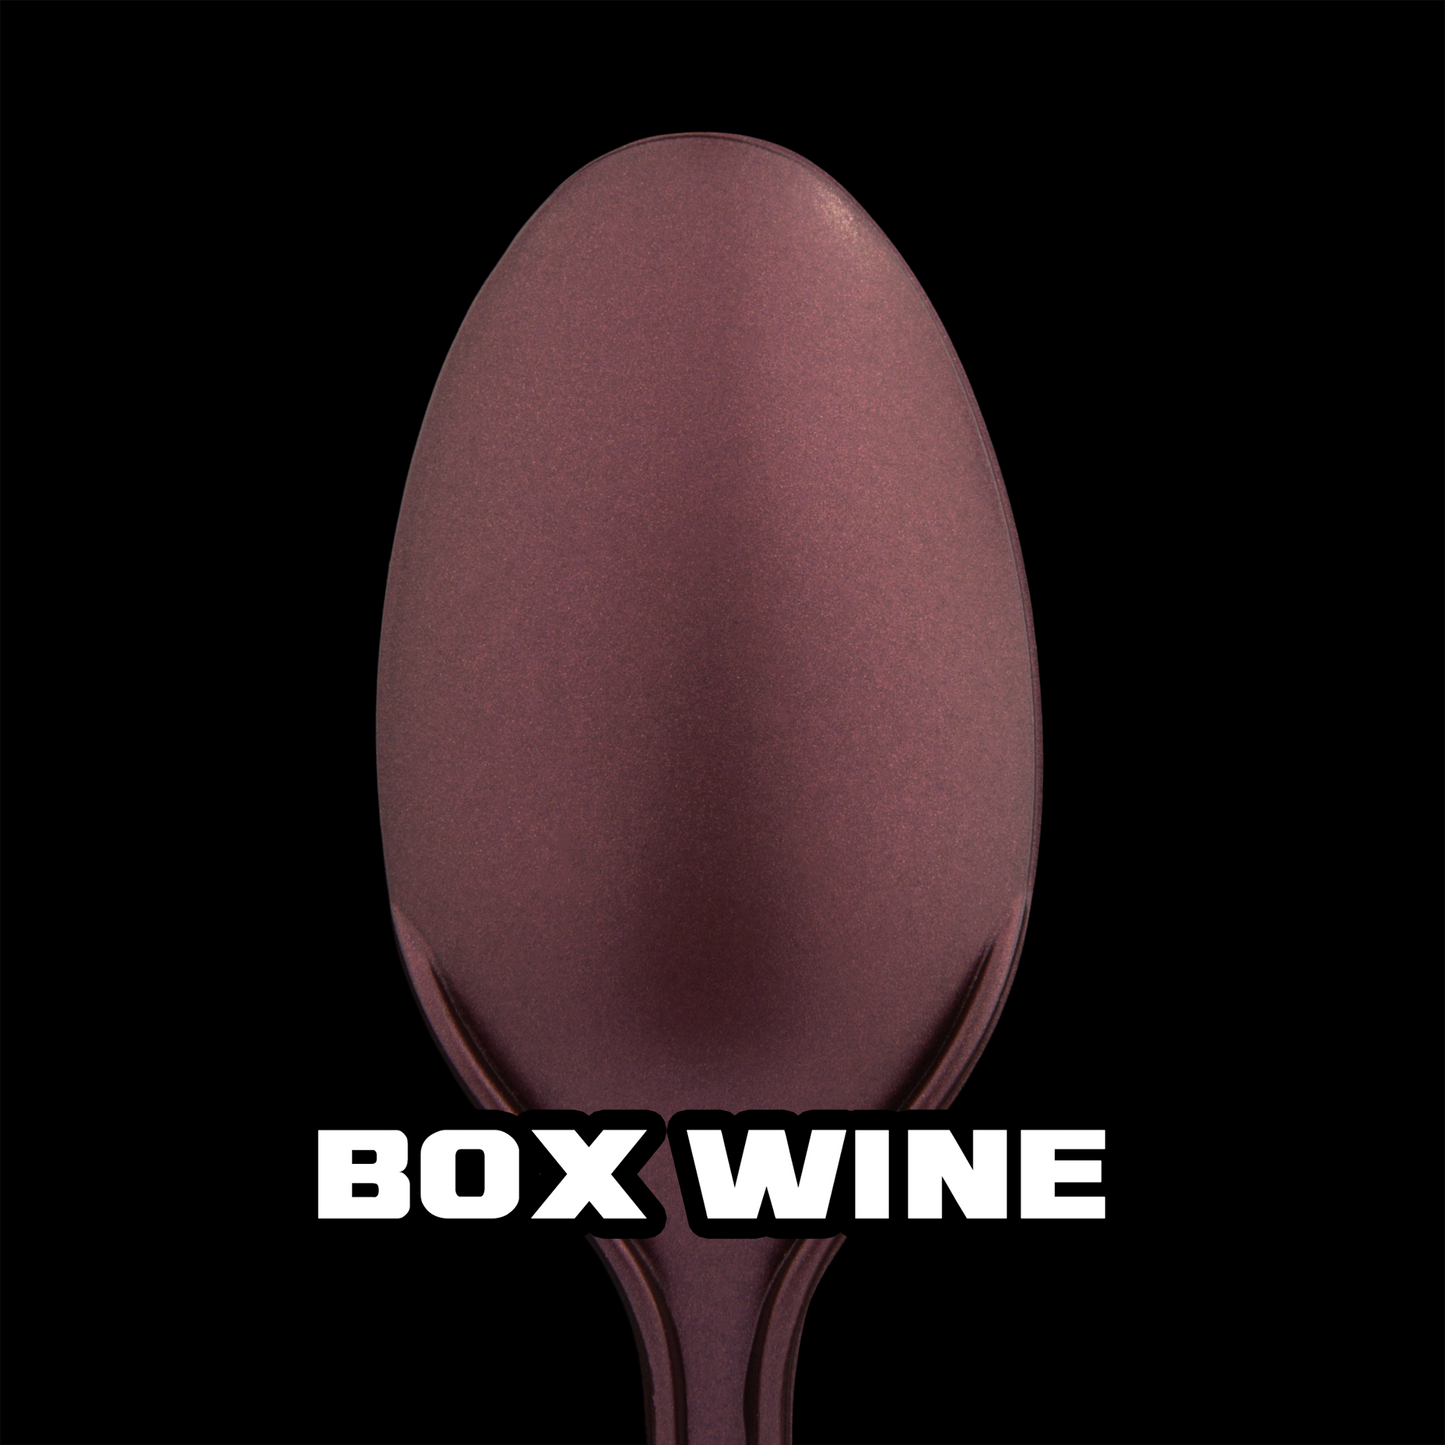 spoon with burgundy-colored metallic paint (Box Wine))